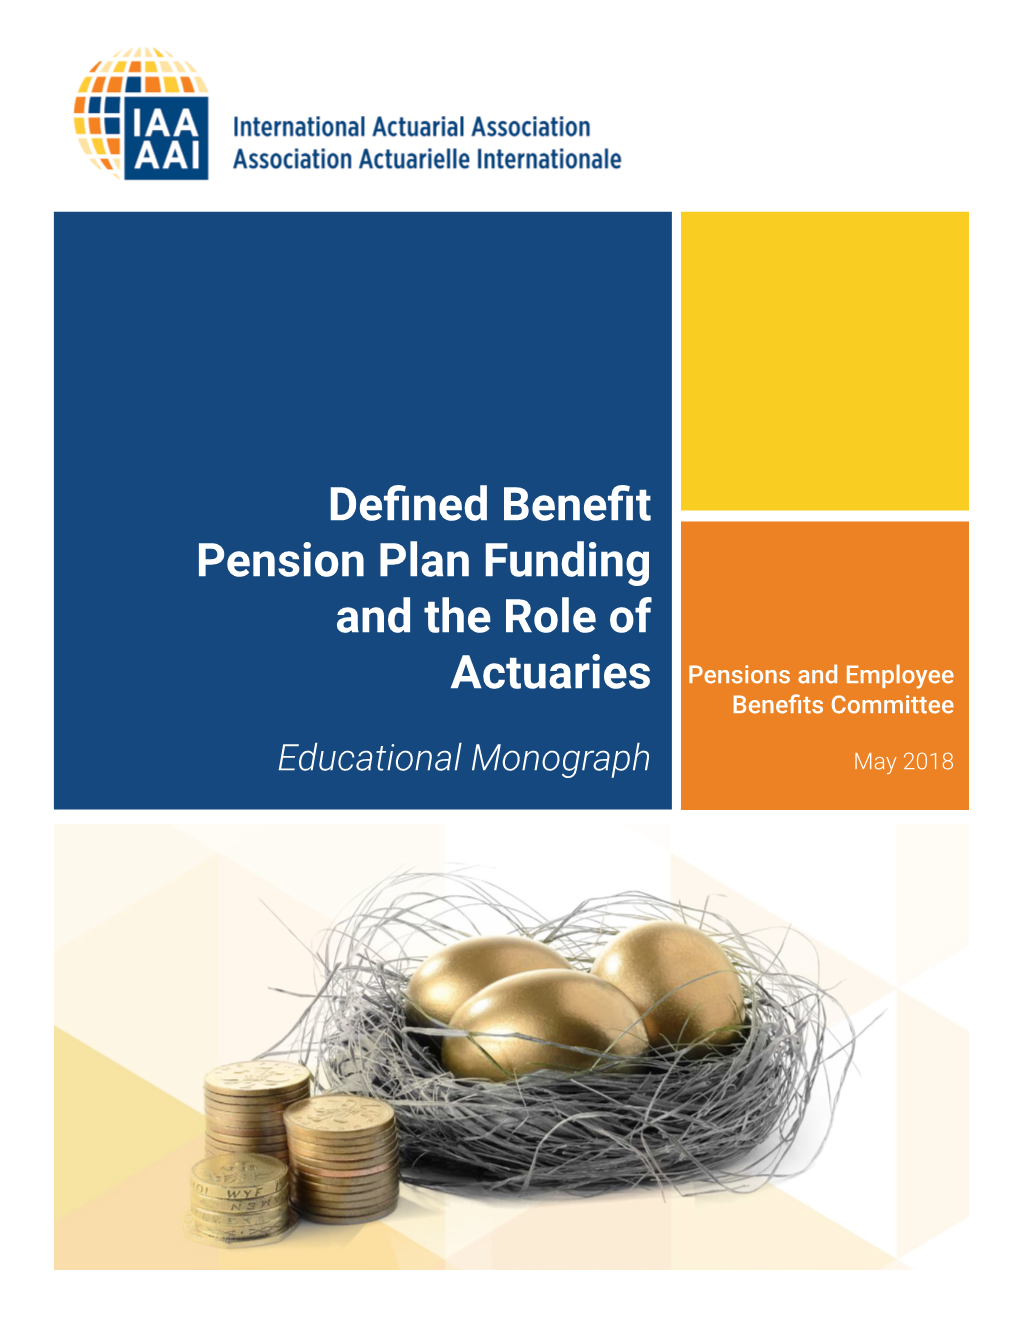 Defined Benefit Pension Plan Funding and the Role of Actuaries Pensions and Employee Benefits Committee